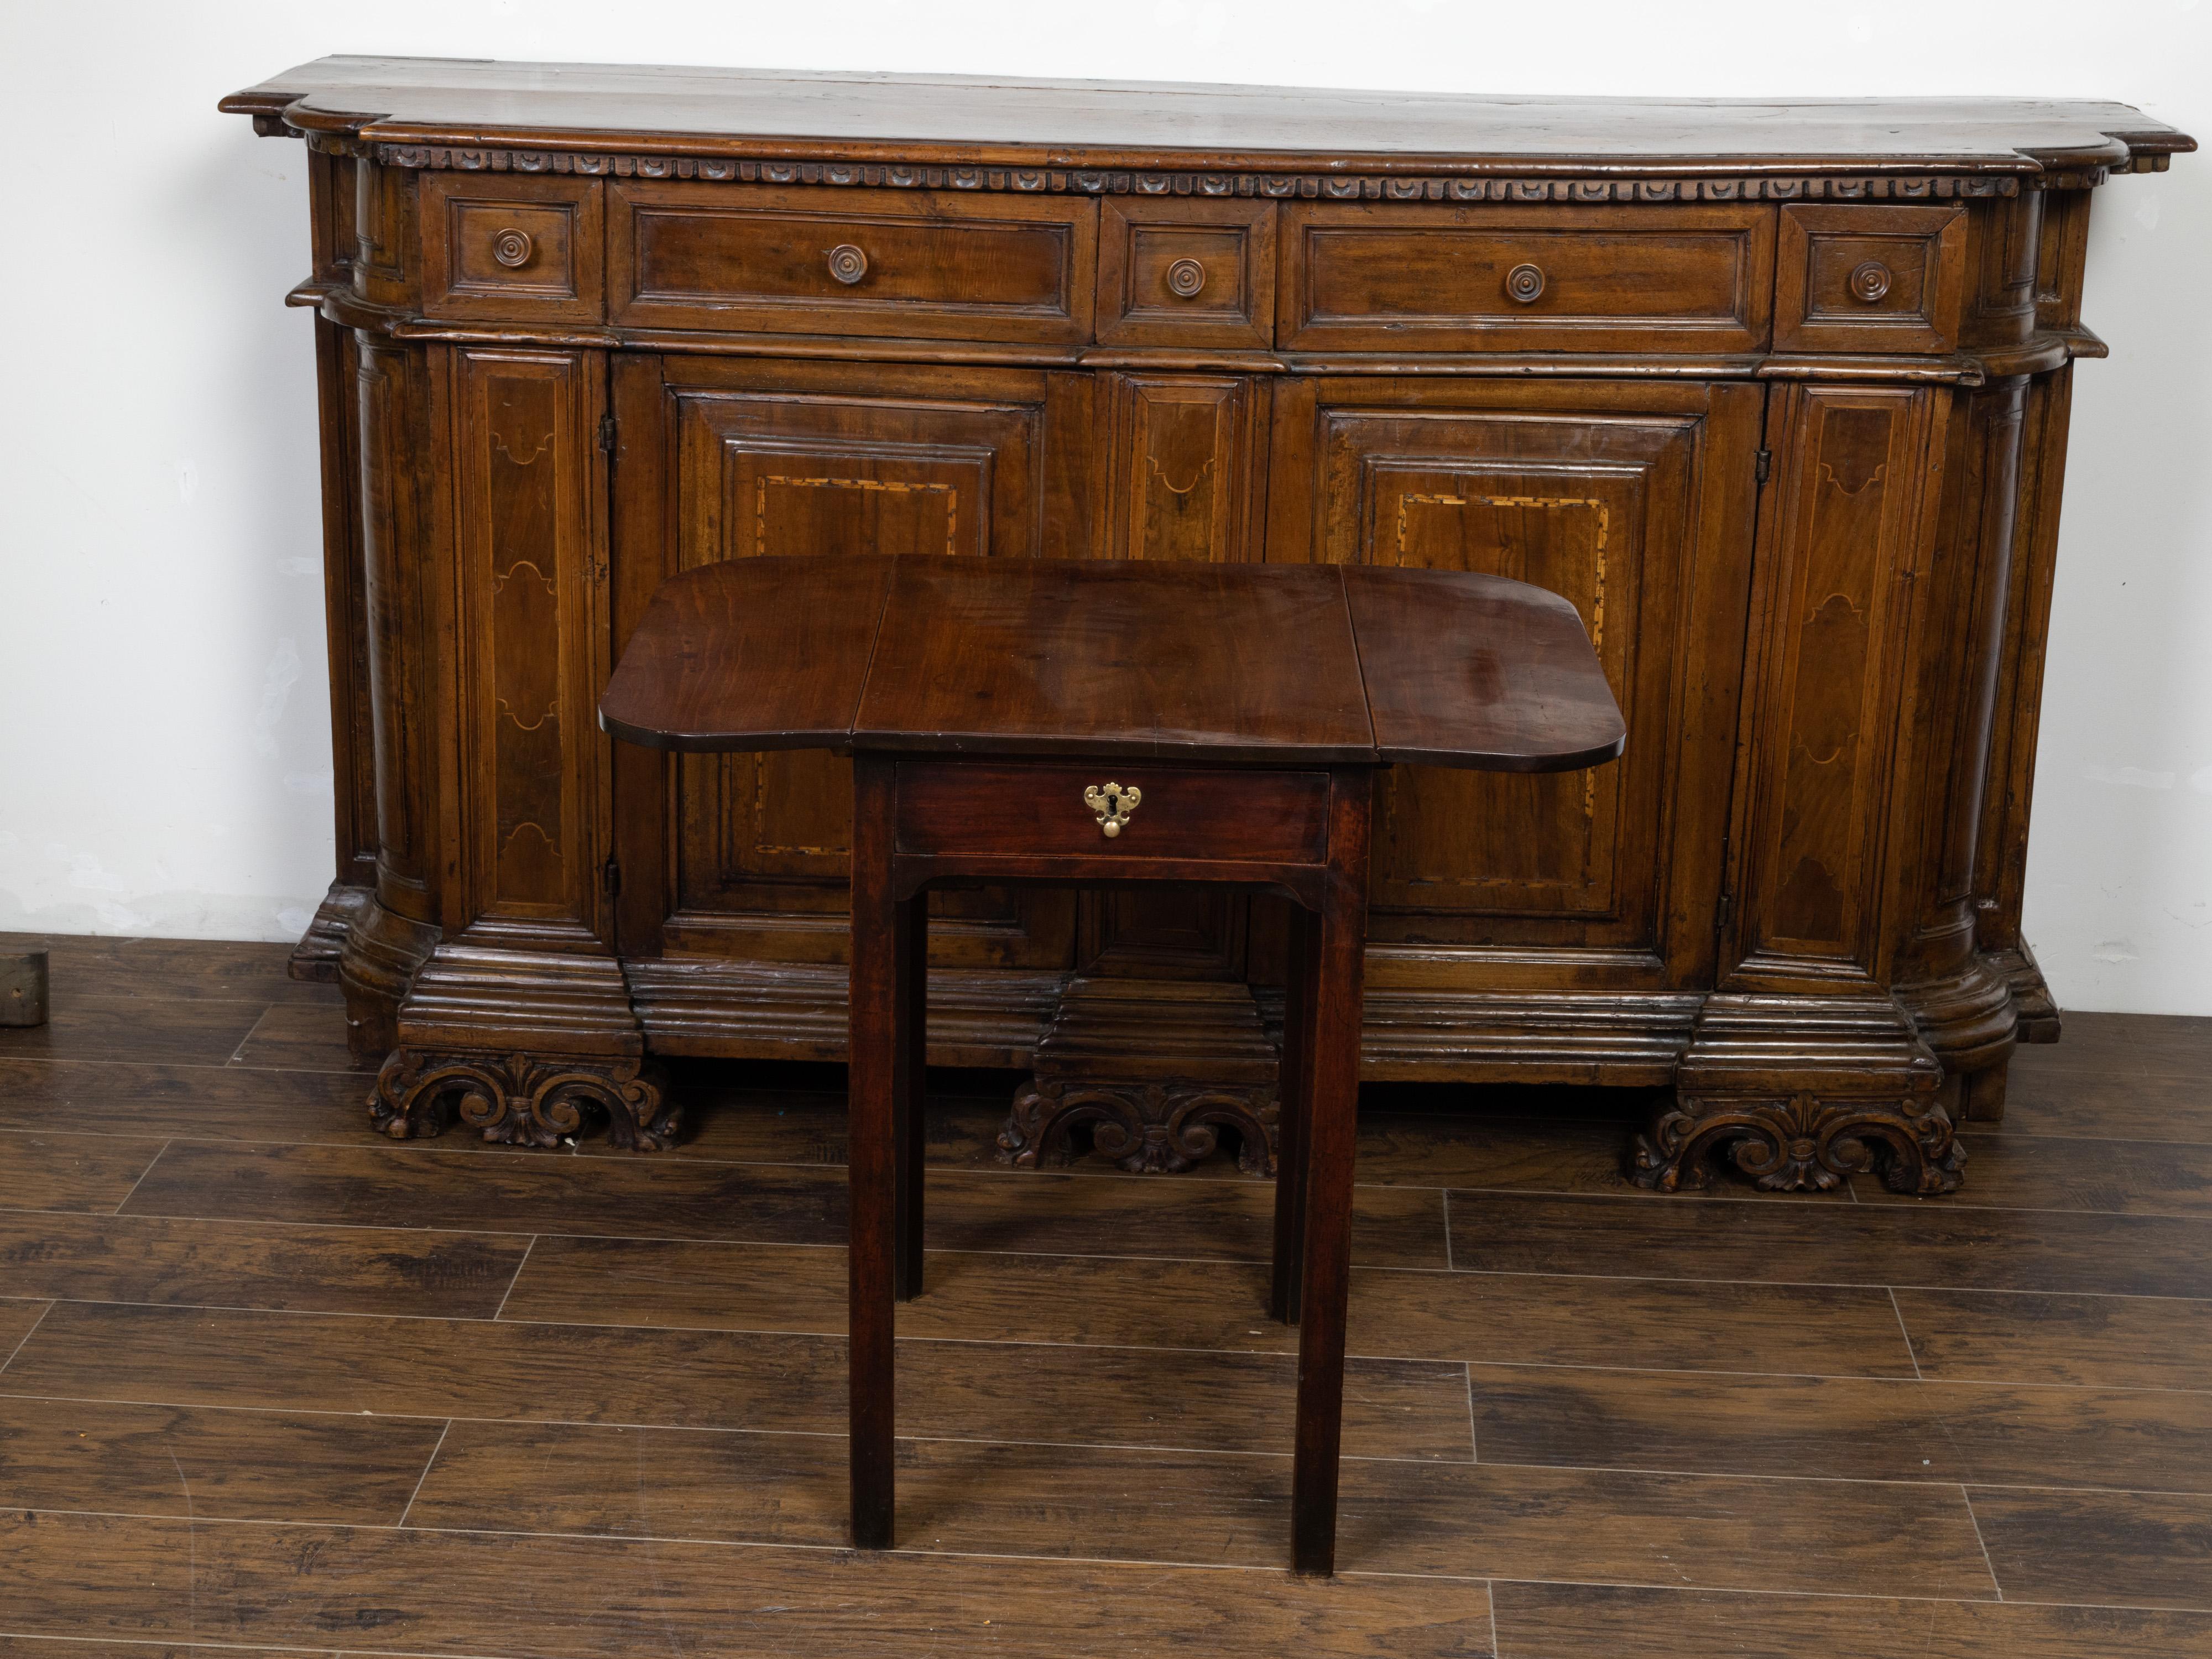 An English Georgian period mahogany pembroke table from the early 19th century, with single drawer and Chippendale style hardware. Created in England during the early years of the 19th century, this mahogany pembroke table features a rectangular top